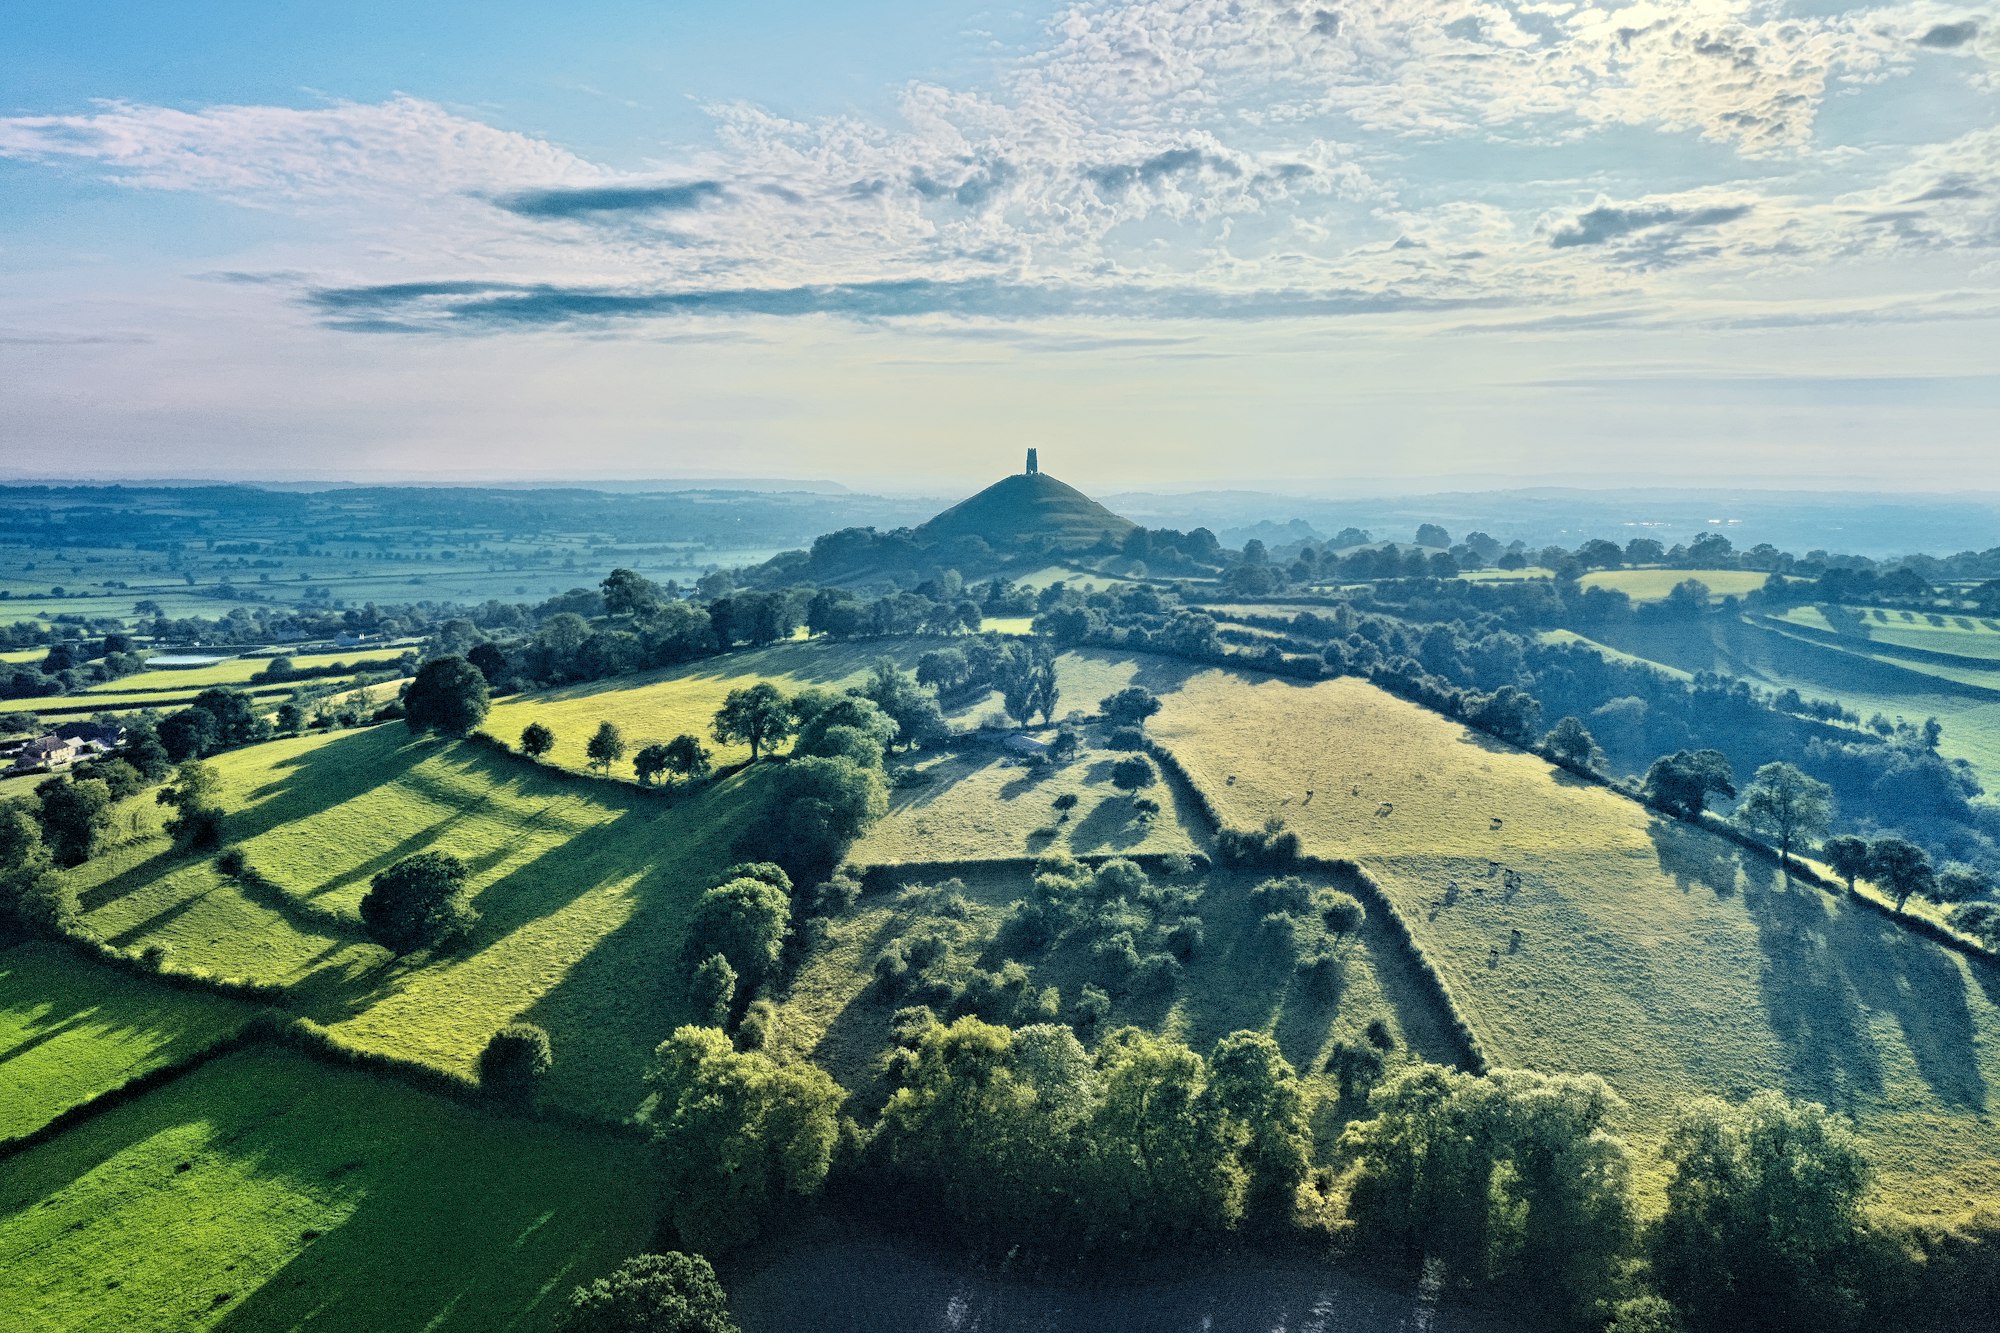 Drone take of Glastonbury Tor, a magical place.